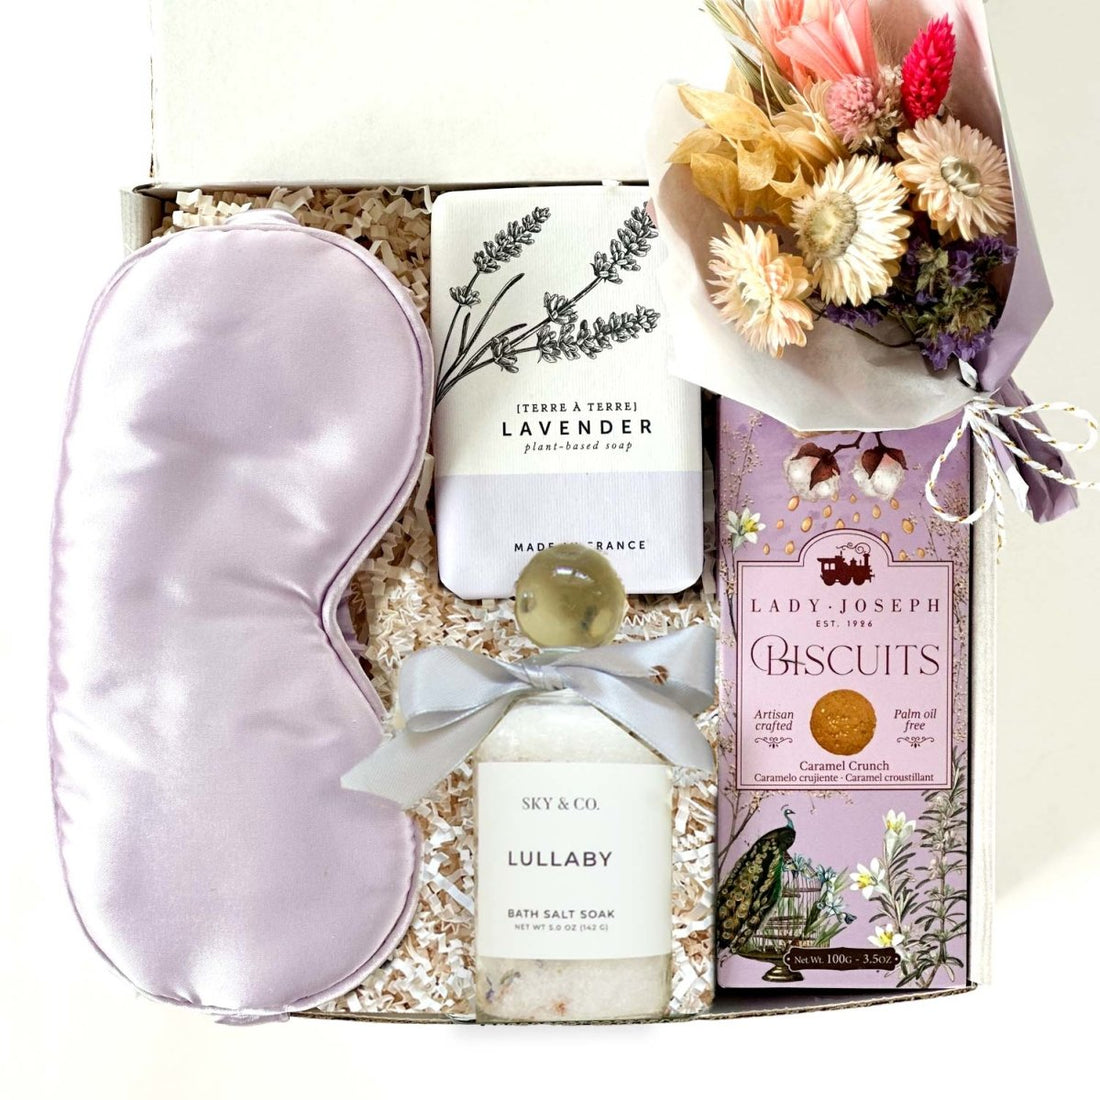 Kadoo Lavender Spa Curated Gift box: natural bath salt, lavender soap, aromatherapy silk eye mask, biscuits & more.